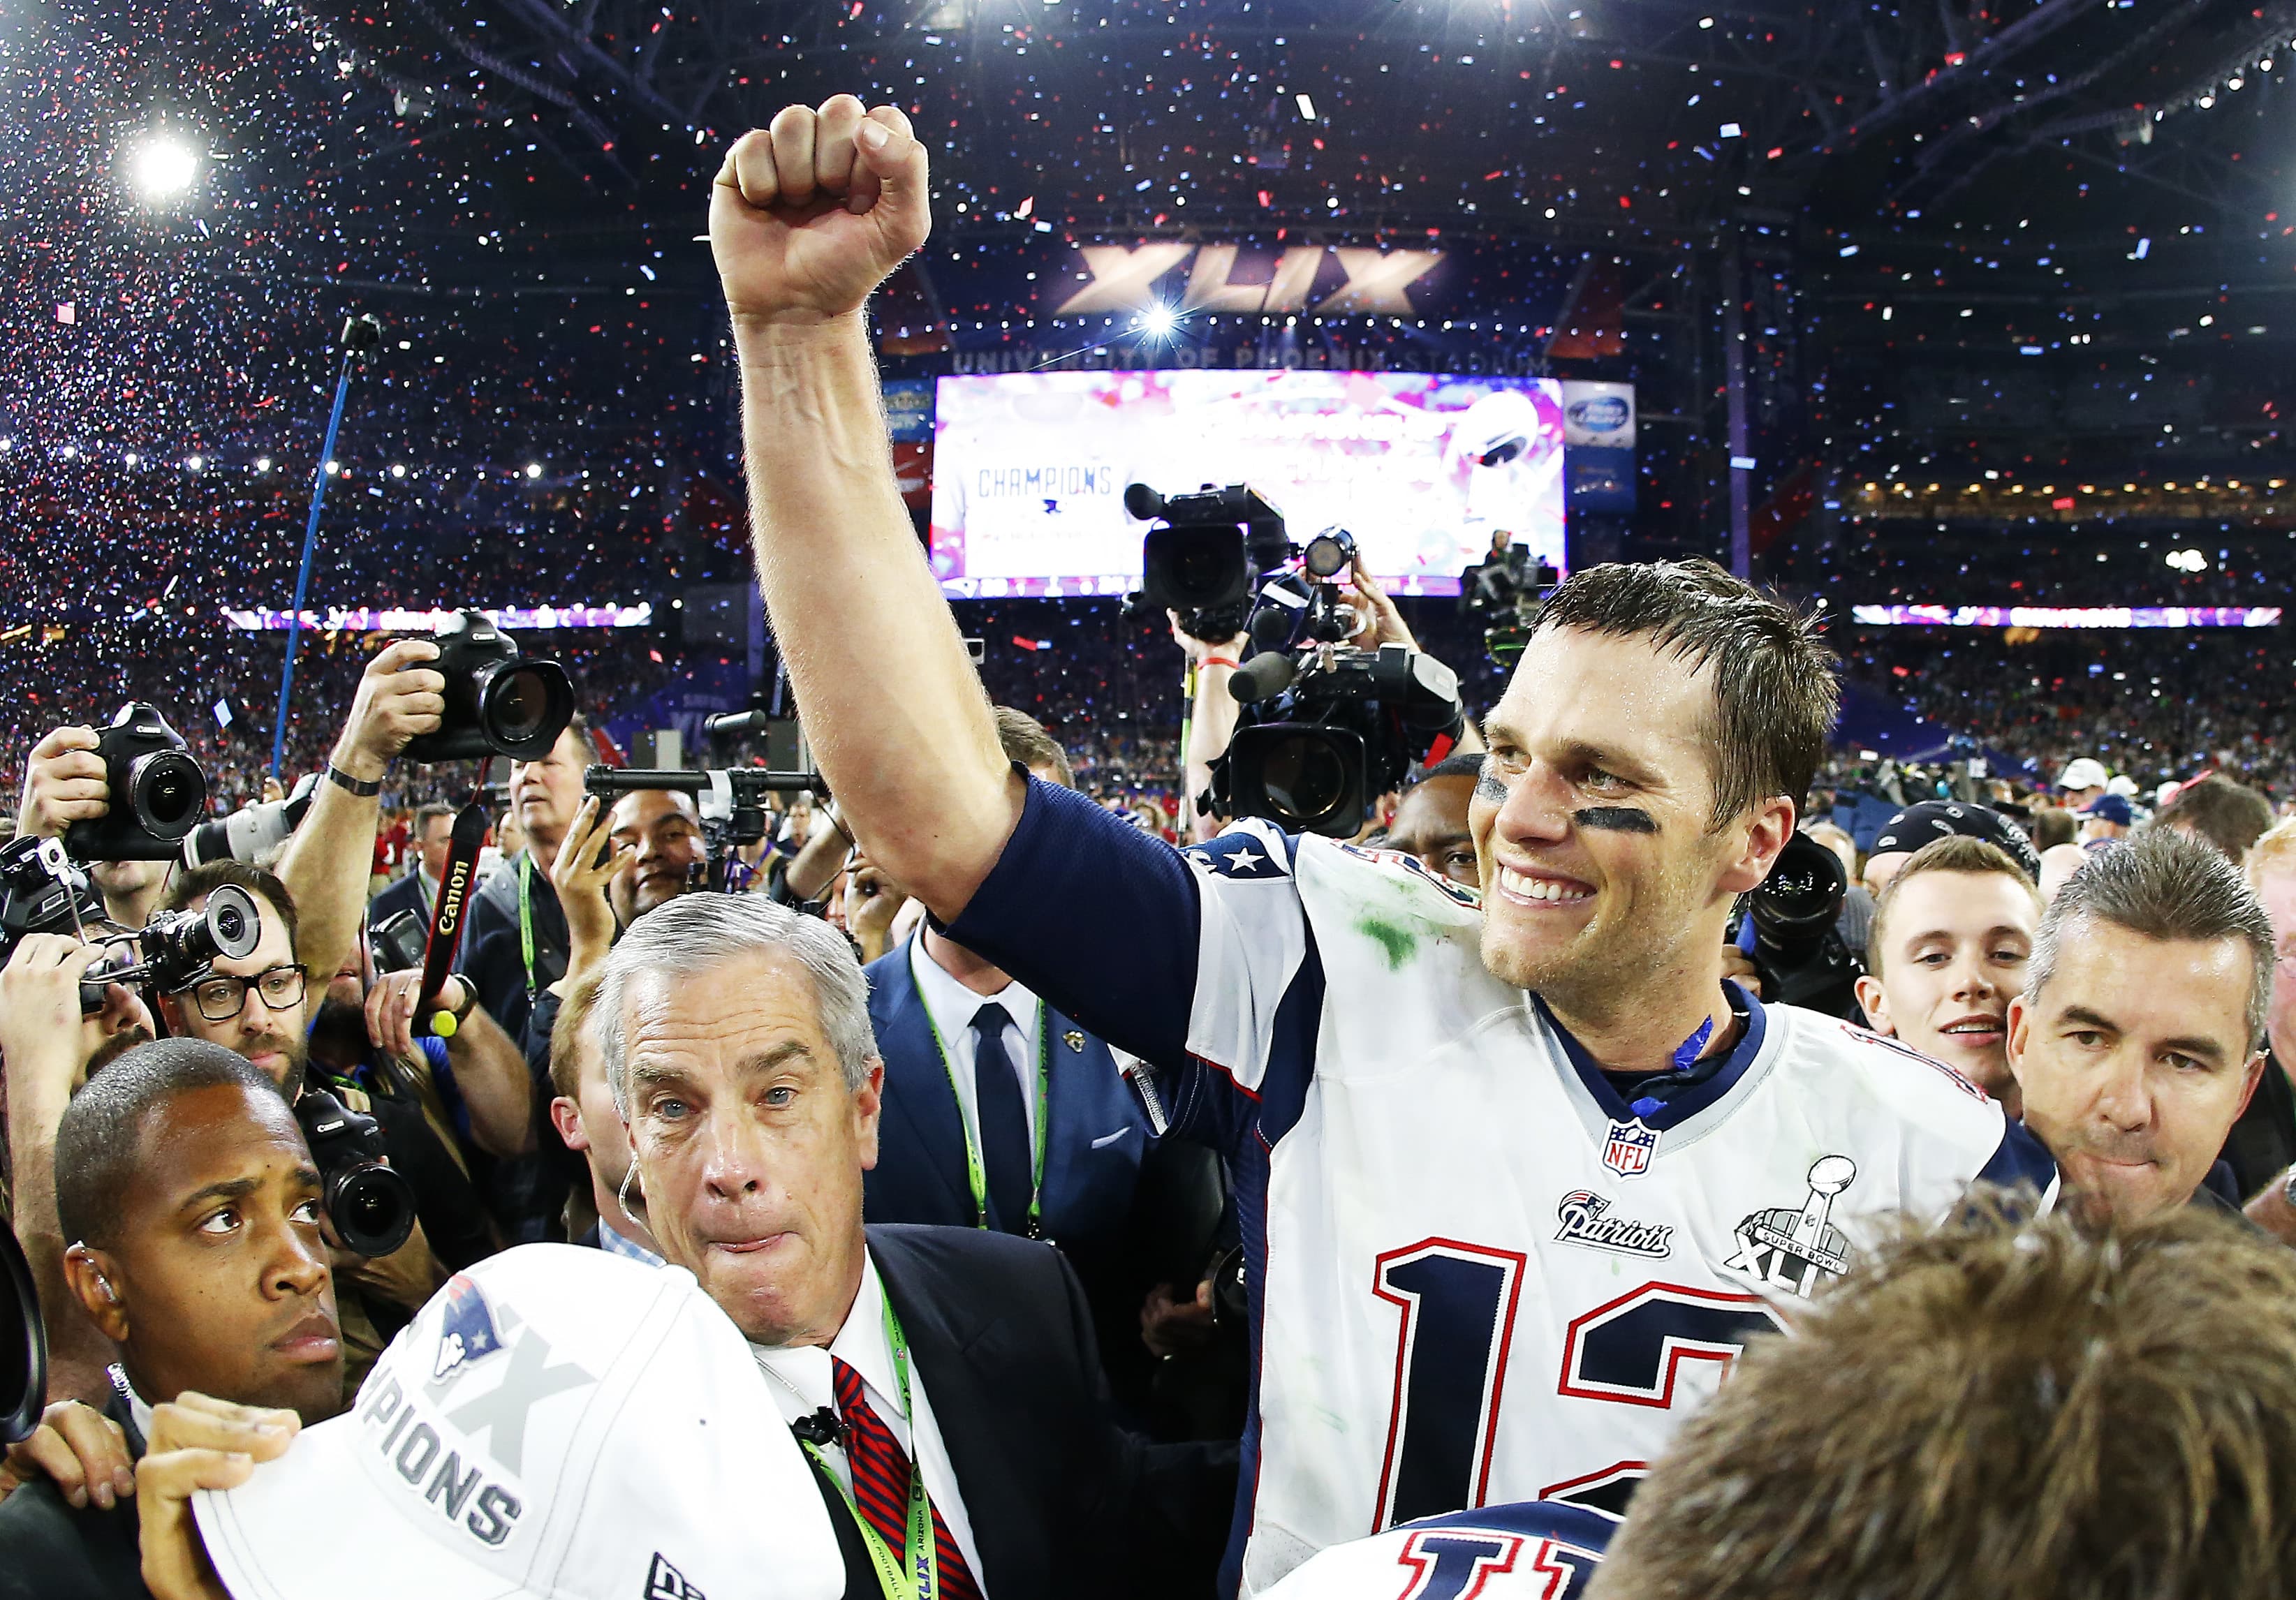 NFL-Patriots beat Seahawks for first Super Bowl win in 10 years